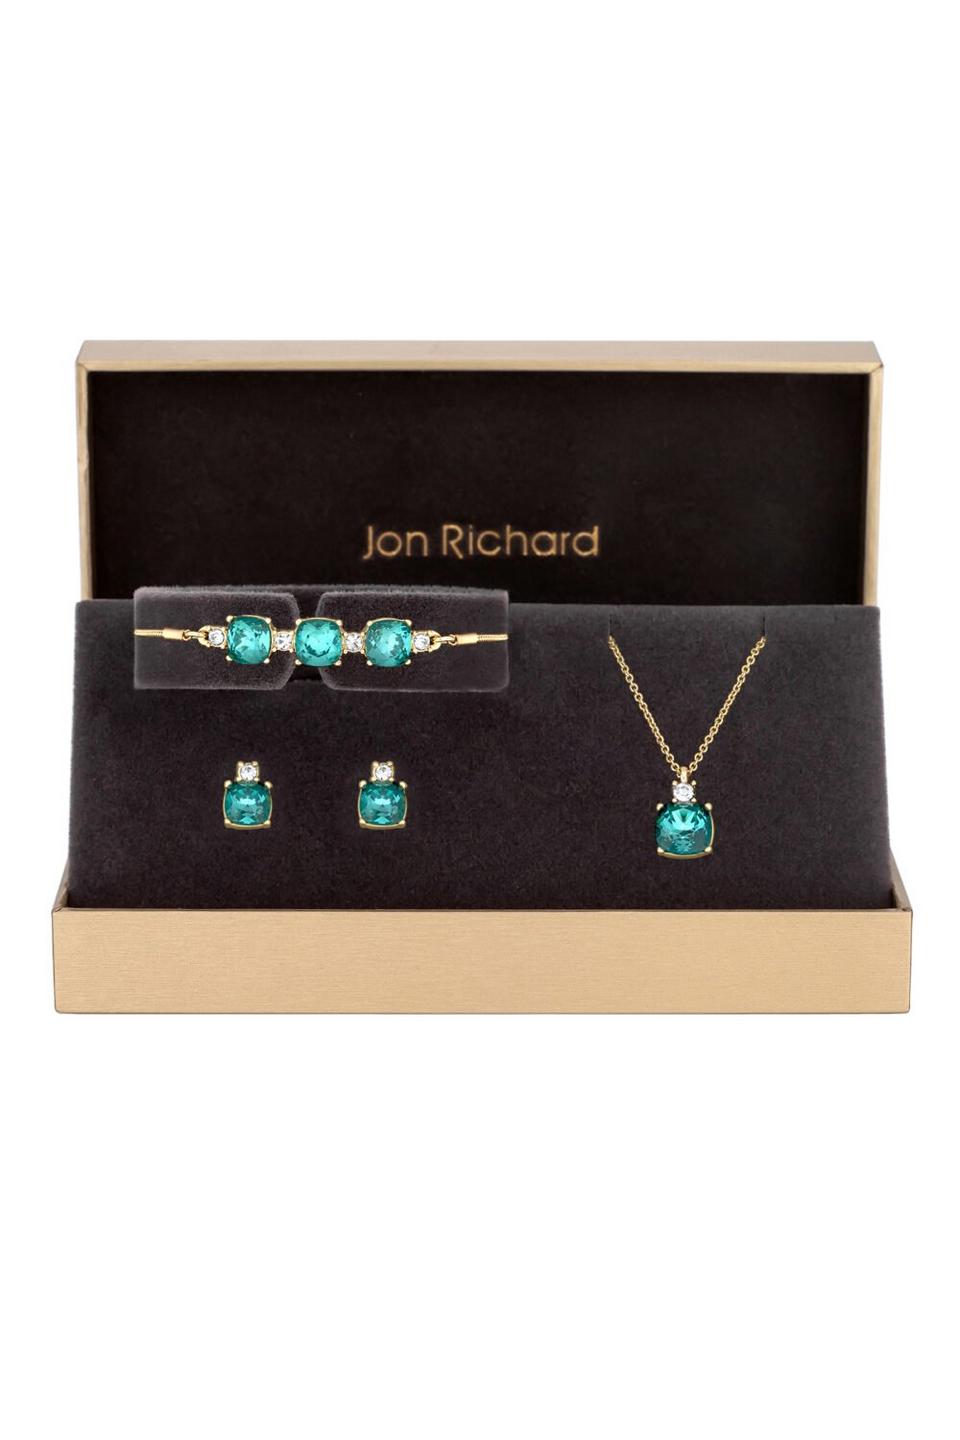 Jewellery | Gold Plated Teal Open Stone Trio Set - Gift Boxed | Jon Richard